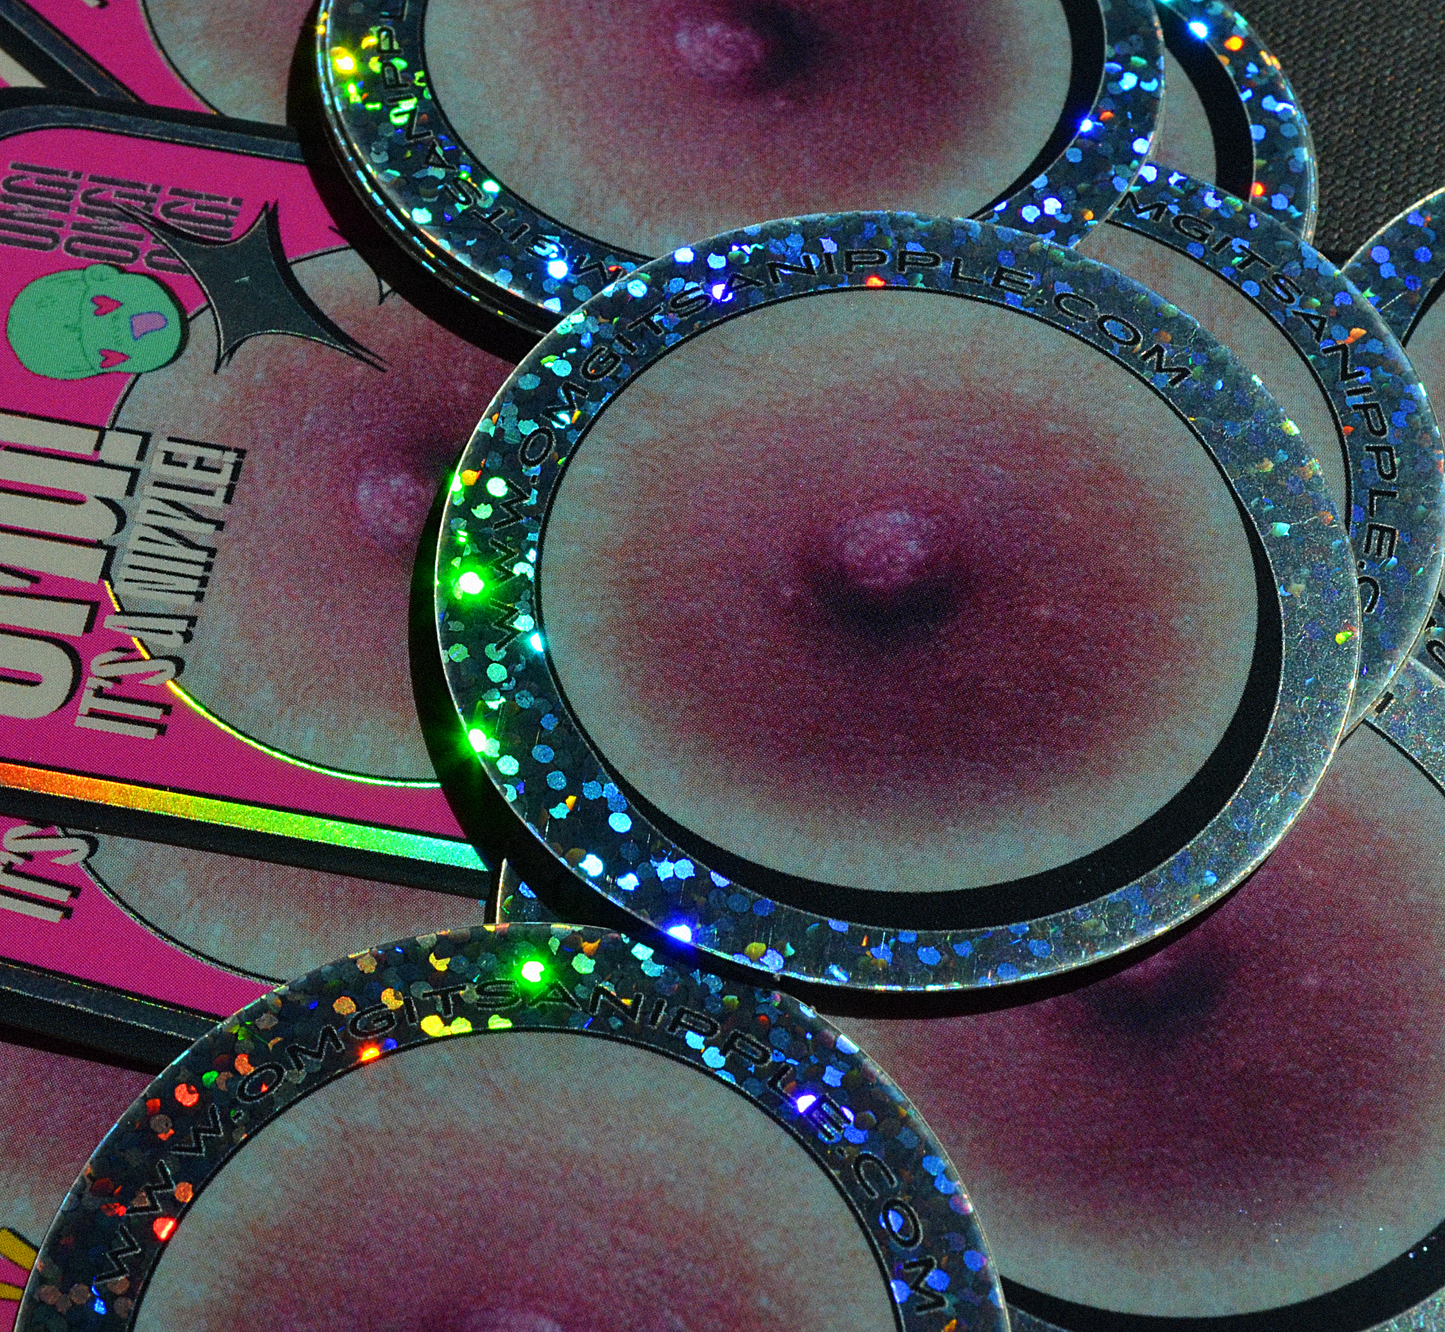 Productfoto of Stickers showing a Nipple.